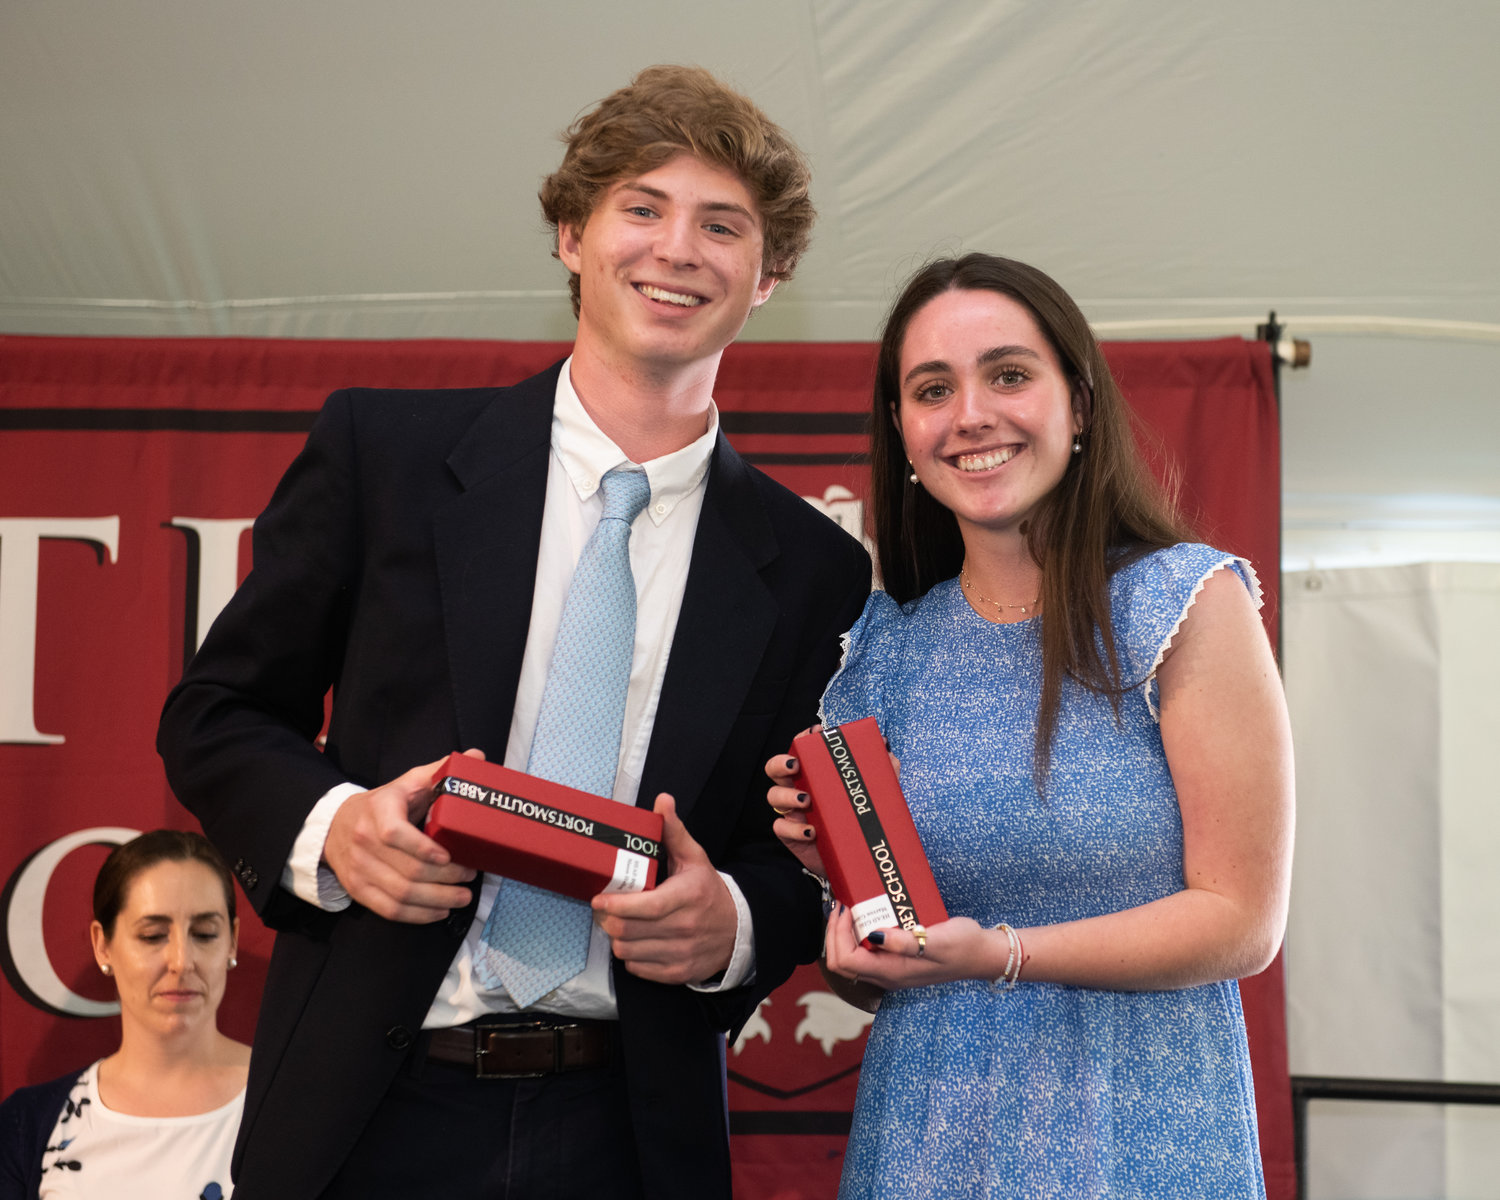 Head Boy Mason Holling and Head Girl Marron Gibbons, both of Portsmouth, were given the Dr. James M. DeVecchi Head Boy and Head Girl Recognition award for their courage to serve and in thanks for their contributions to Portsmouth Abbey School. Mason was also presented with the Lieutenant Governor’s Leadership Award for dedication to his studies and a commitment to school service. In addition, he was recognized for his commitment as a head Red Key campus tour guide. Marron received the Dom Luke Childs ’57 Memorial Medal for her qualities of intelligence, virtue and concern for others.